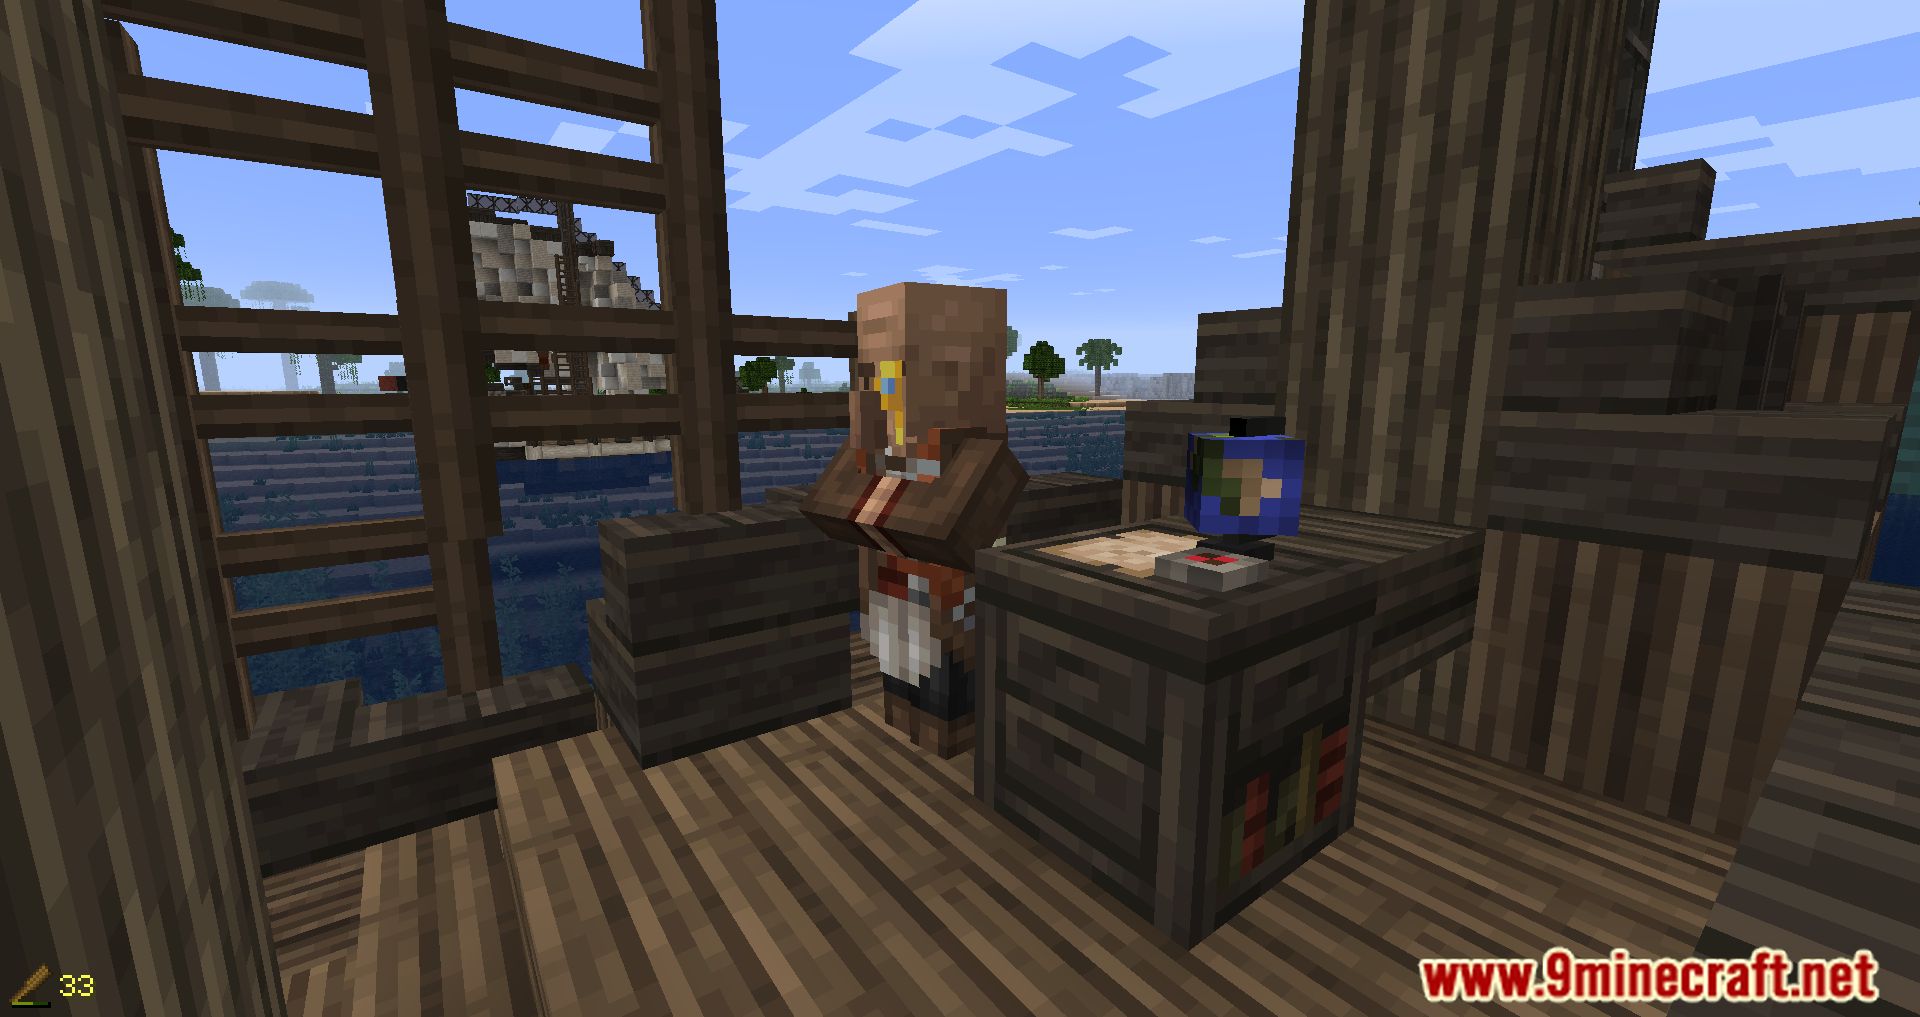 Corsair: The Seven Treasures Modpack (1.16.5) - Pirates, Riches, and Adventures 26